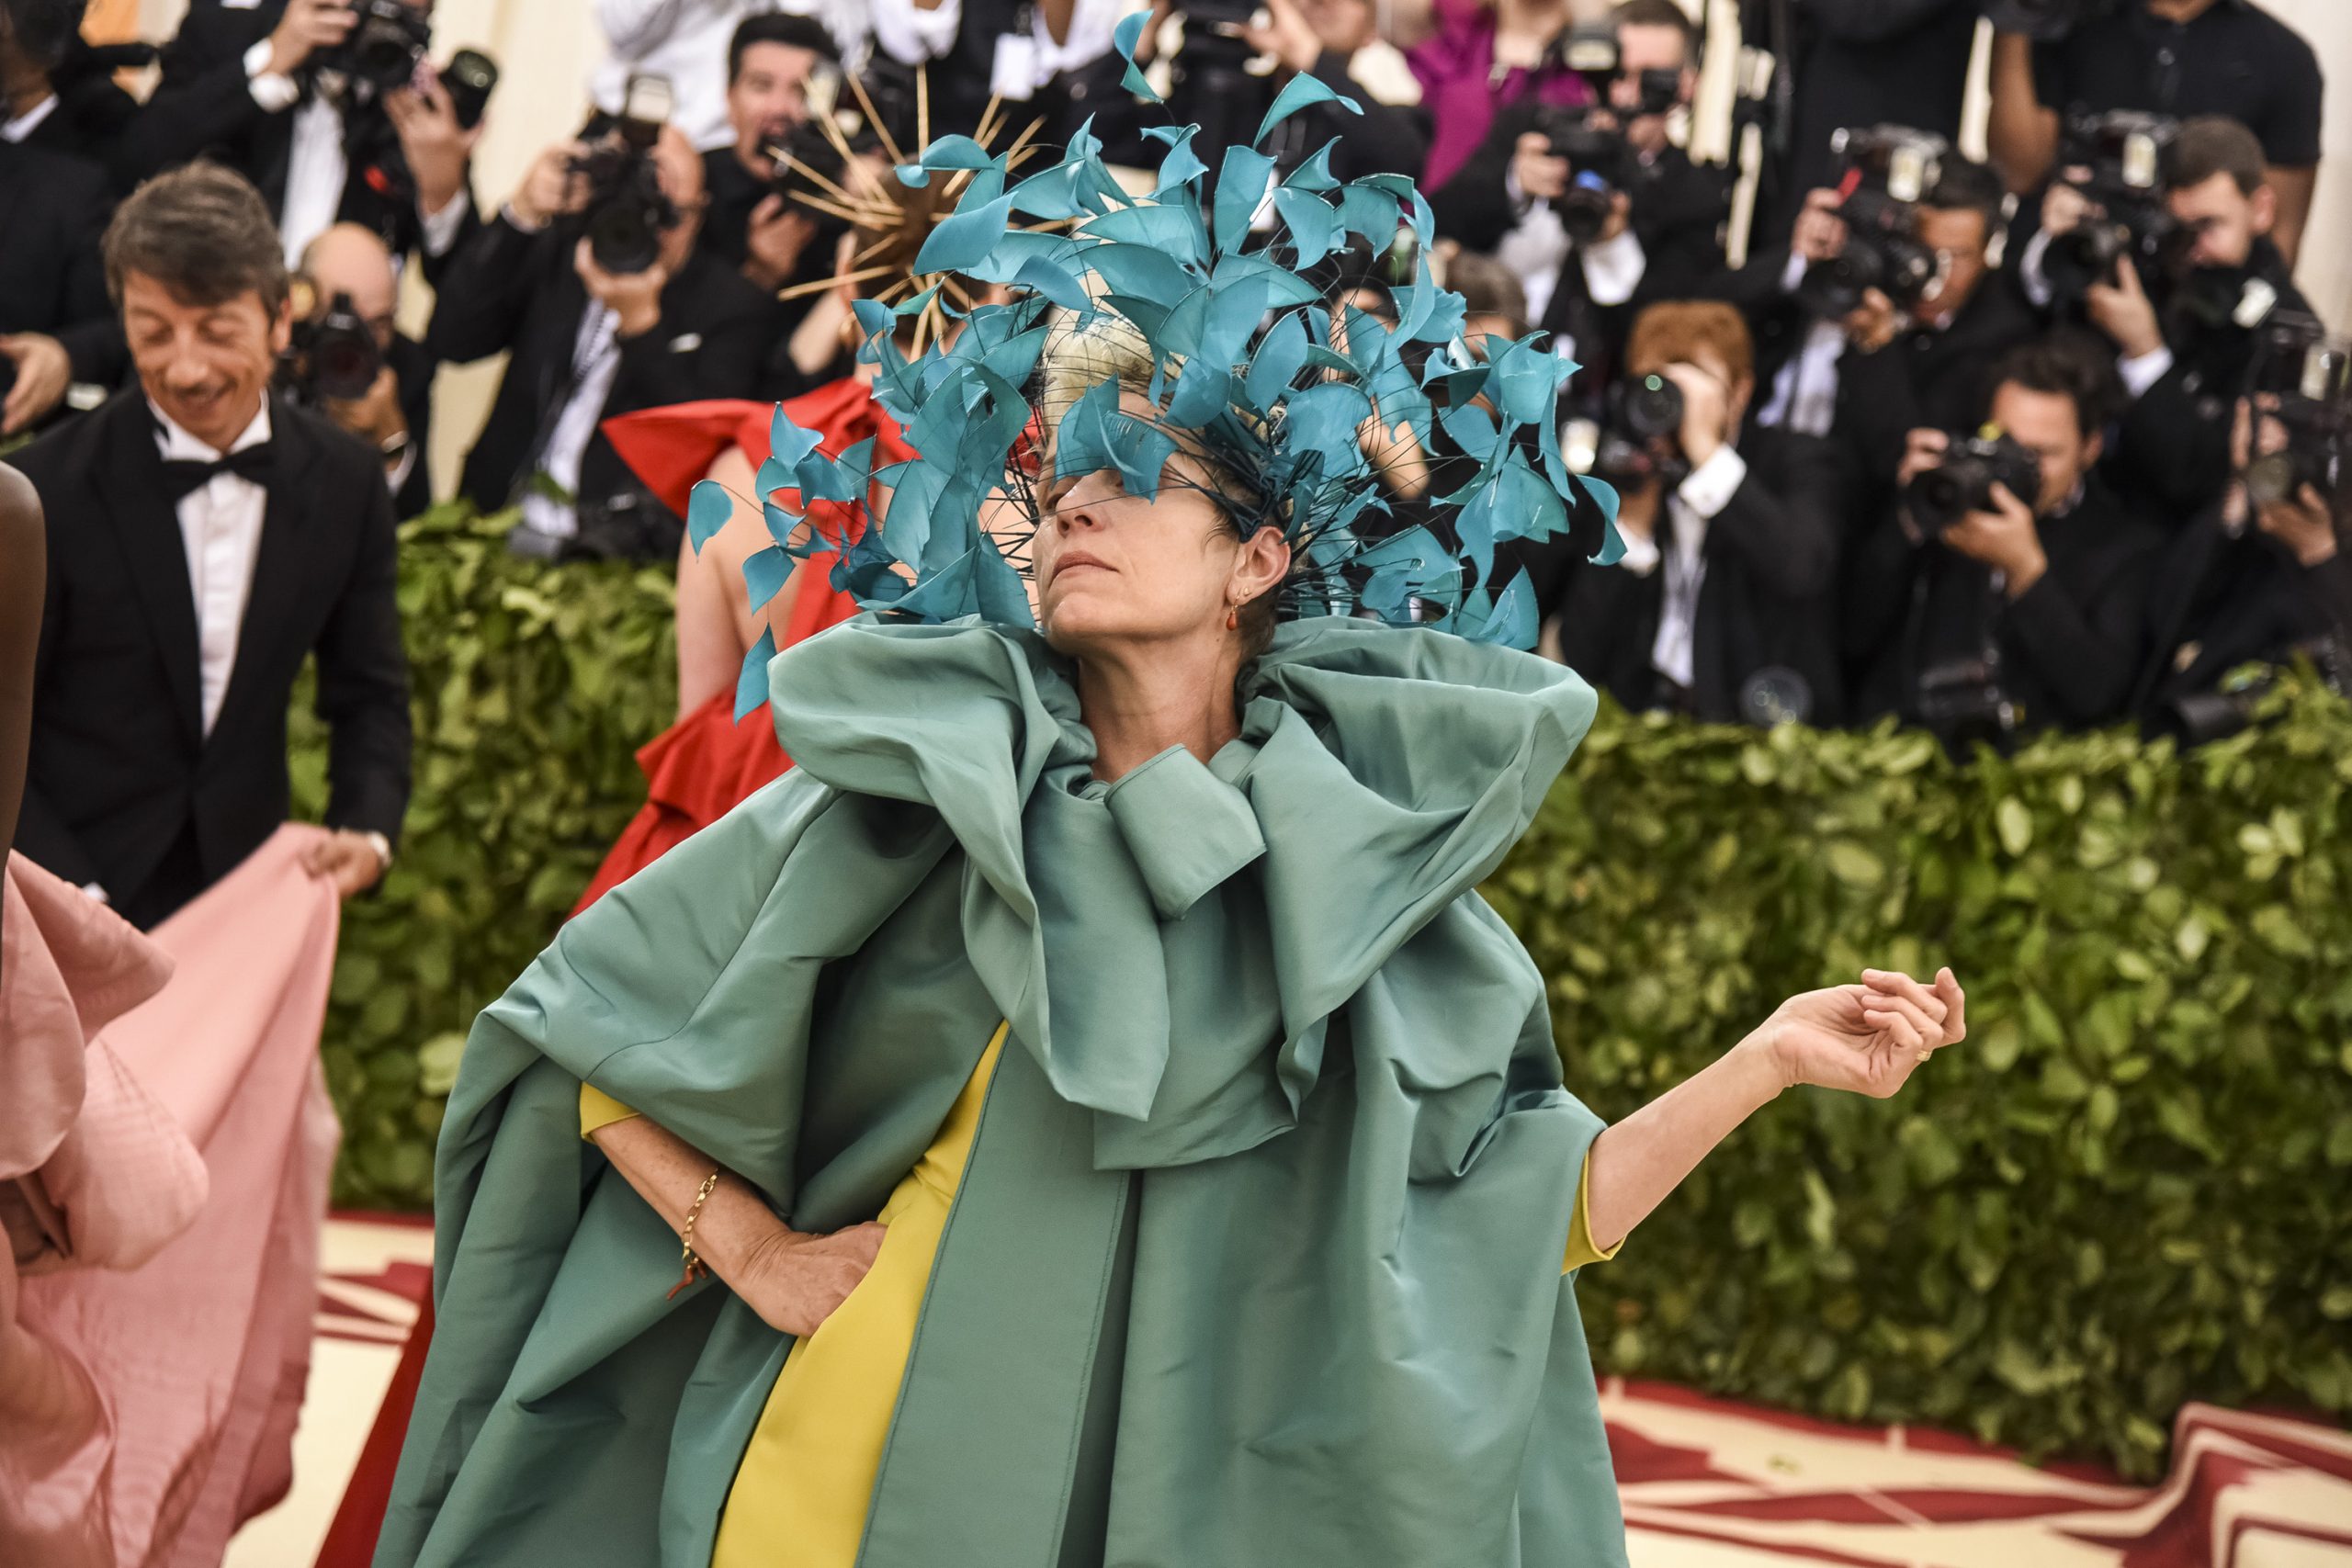 Frances McDormand attends the Heavenly Bodies: Fashion and the Catholic Imagination Costume Institute Gala 2018 on Monday, May 7, 2018 at the Metropolitan Museum of Art in New York, N.Y. (Laura Thompson/New York Daily News/TNS)